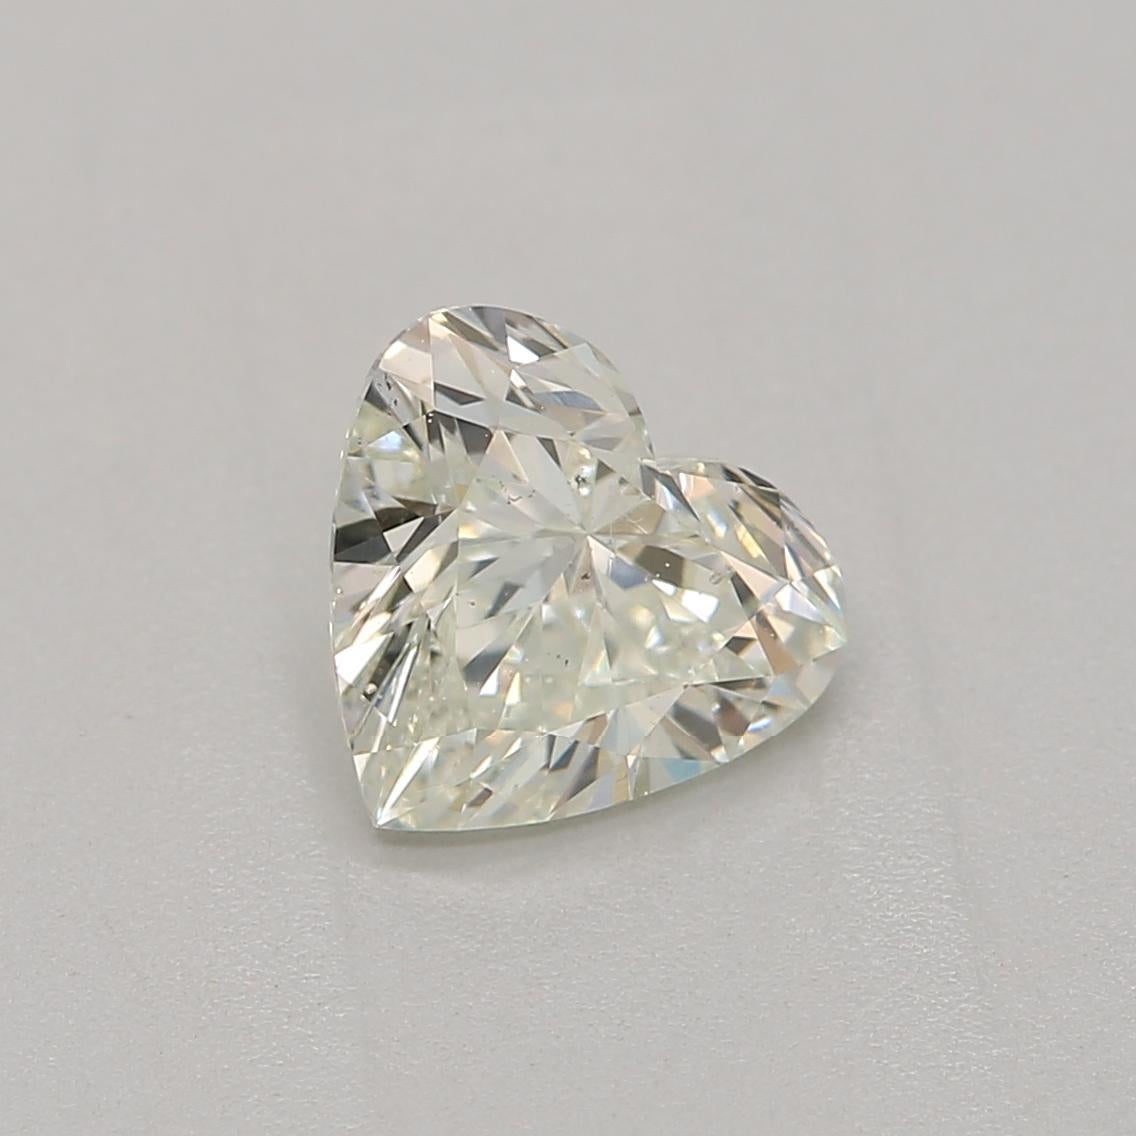 *100% NATURAL FANCY COLOUR DIAMOND*

✪ Diamond Details ✪

➛ Shape: Heart
➛ Colour Grade: Very Light Green Yellow
➛ Carat: 0.60
➛ Clarity: Si1
➛ GIA  Certified 

^FEATURES OF THE DIAMOND^

Our heart-shaped diamond is a unique and romantic variation